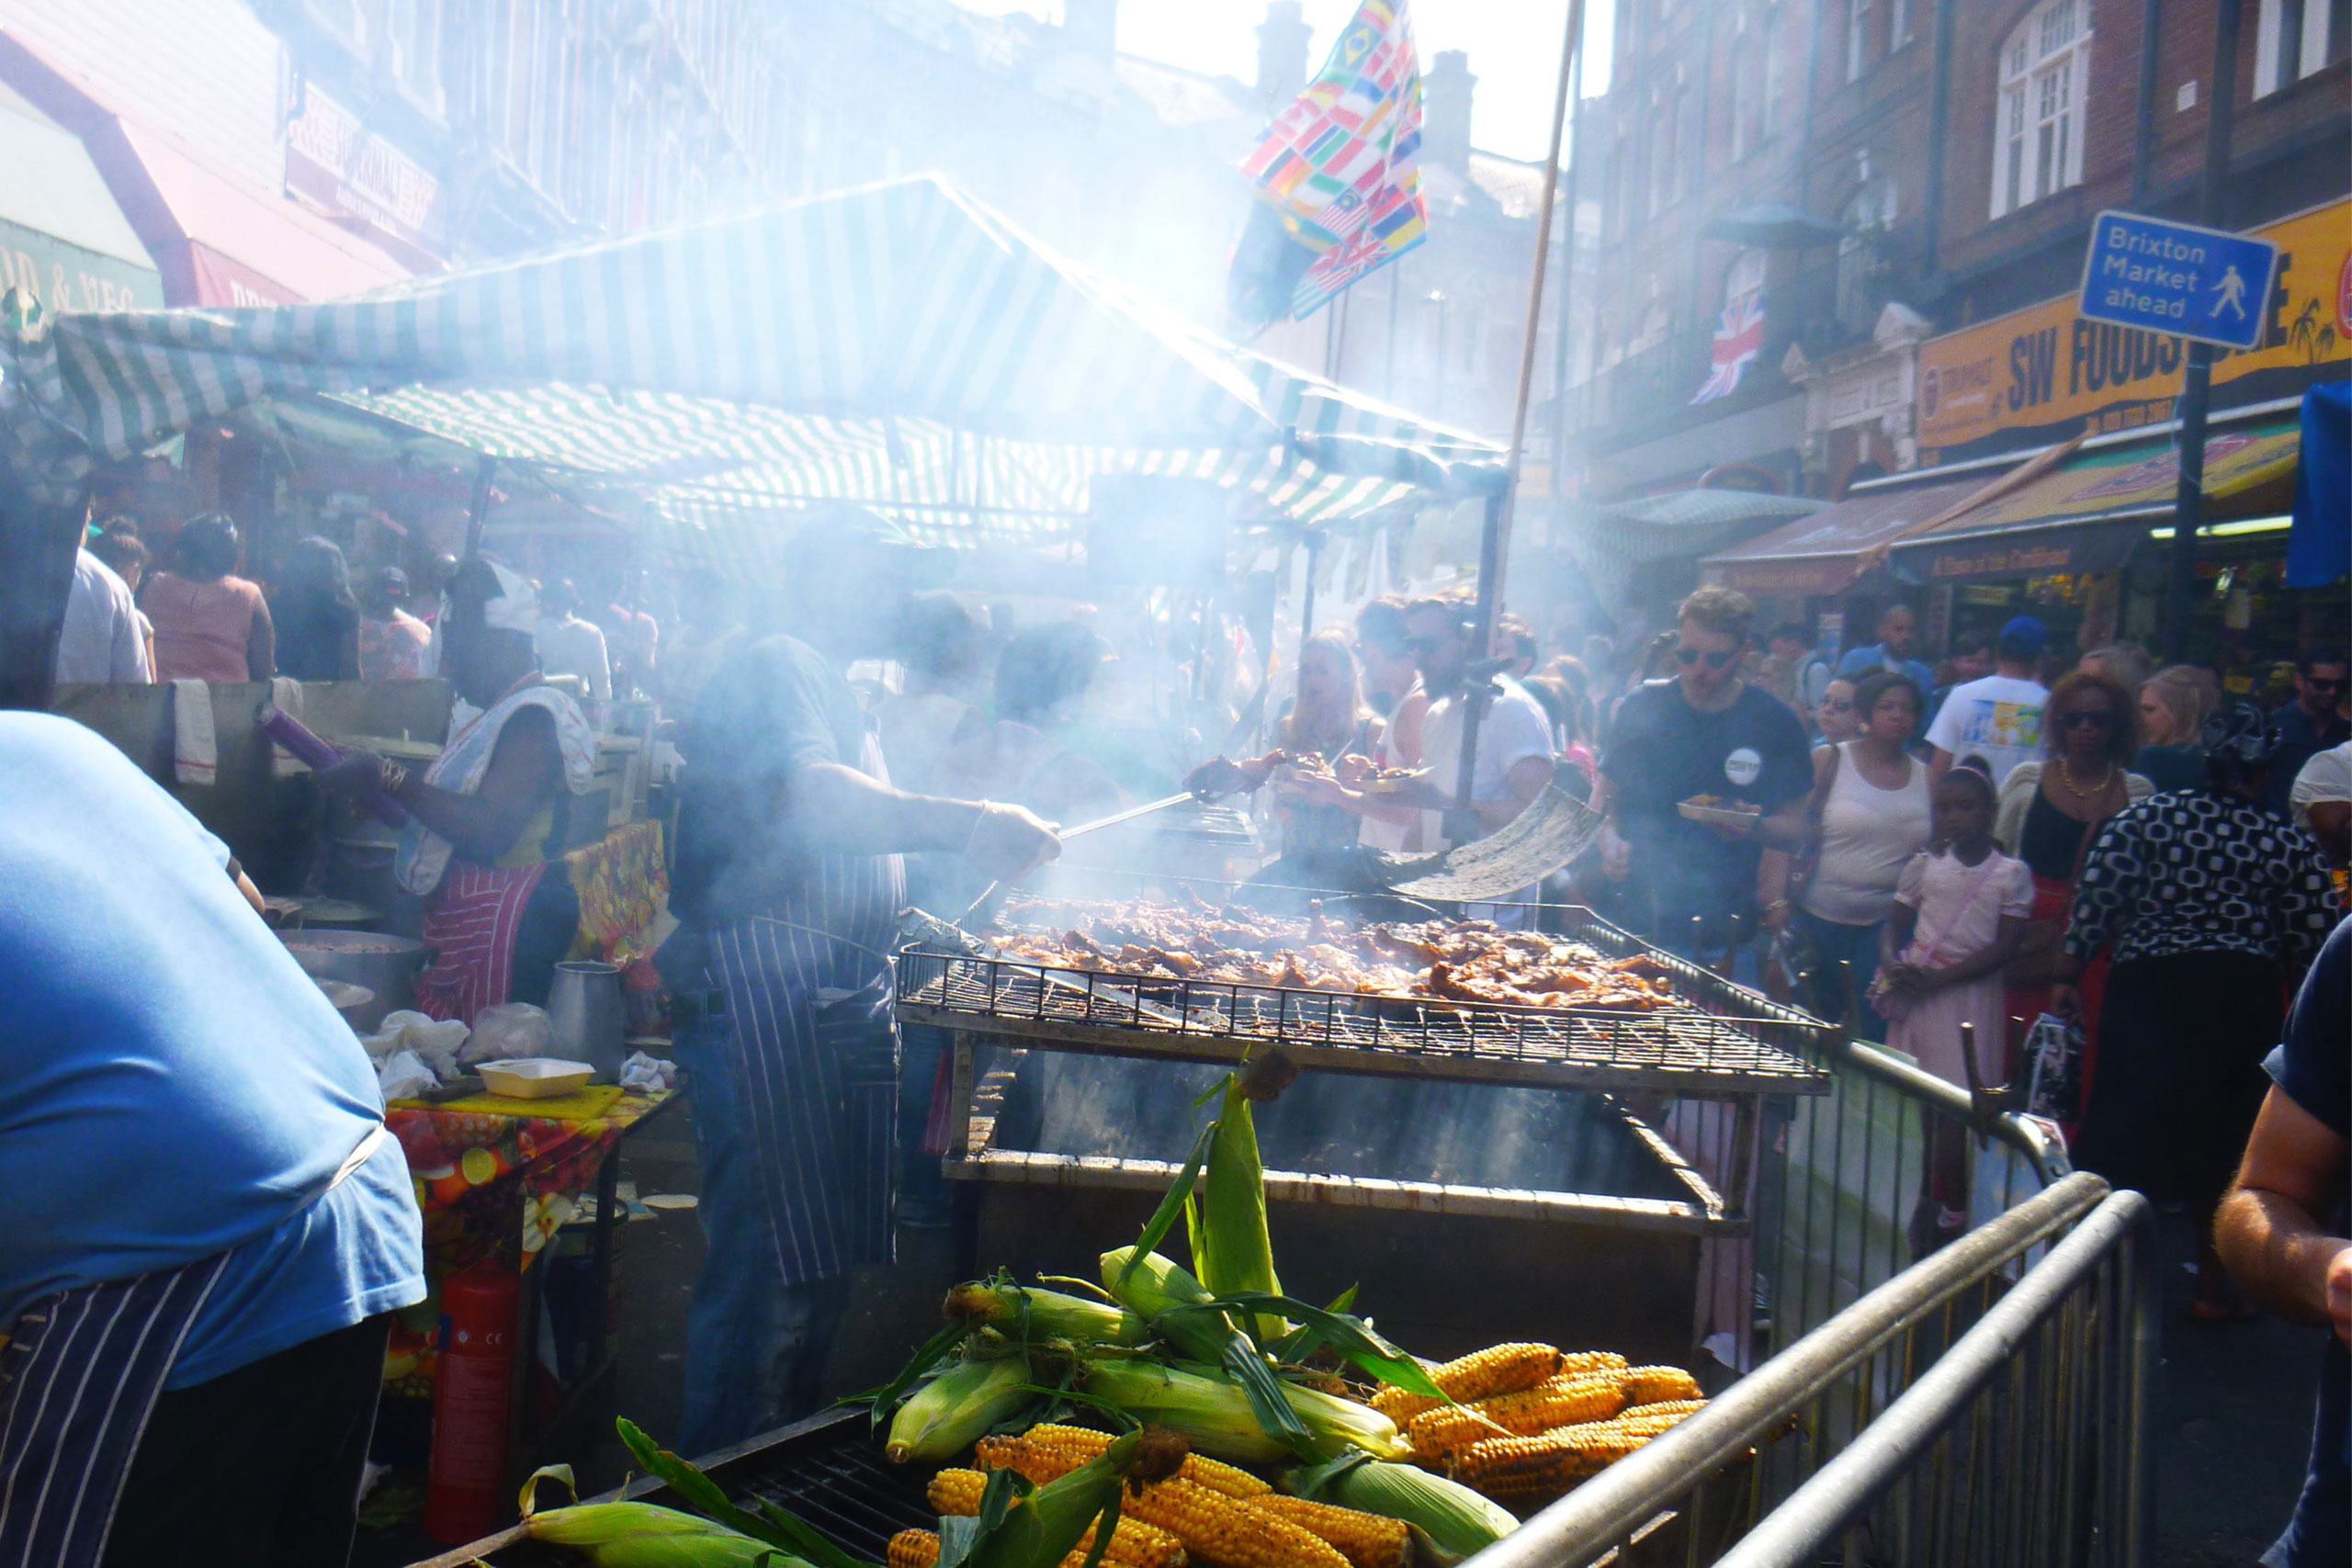 Brixton food market. There is a barbecue with smoke rising from it and fresh corn. The market is crowded with people browsing.